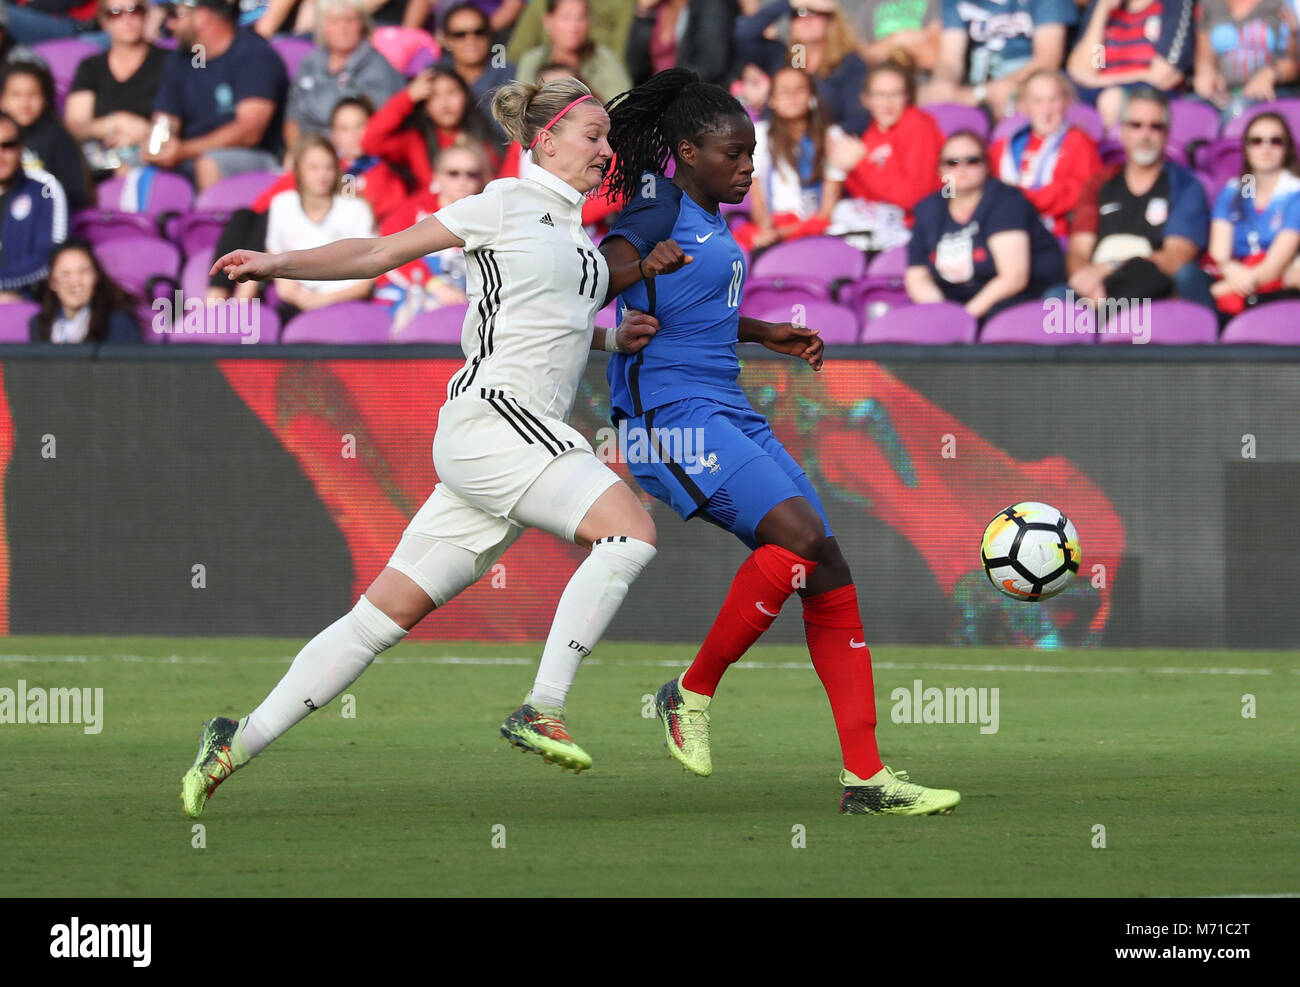 Orlando, Florida, USA. 7th Mar, 2018. Germany forward Alexandra Popp (11) battles for the ball with France defender Griedge Mbock Bathy (19) during the first half of the SheBelieves Cup women's soccer match between the German Women's National Team and the French Women's National Team at the Orlando City Stadium in Orlando, Florida. Credit: Mario Houben/ZUMA Wire/Alamy Live News Stock Photo